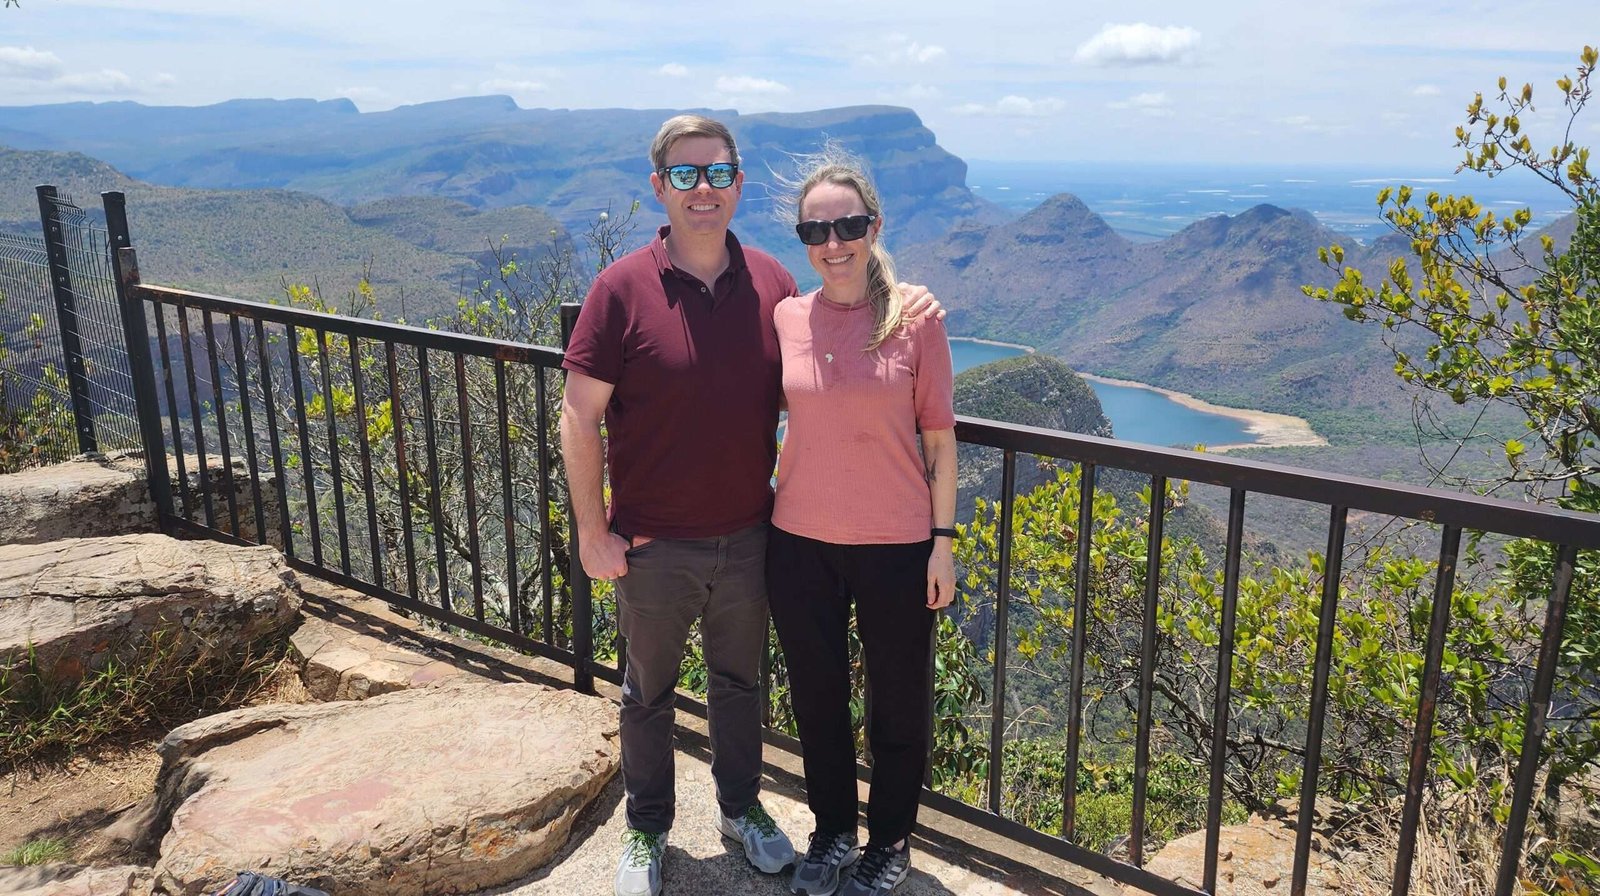 Shows viewpoint of the Three Rondavels, Blyde River Canyon, Panorama Route